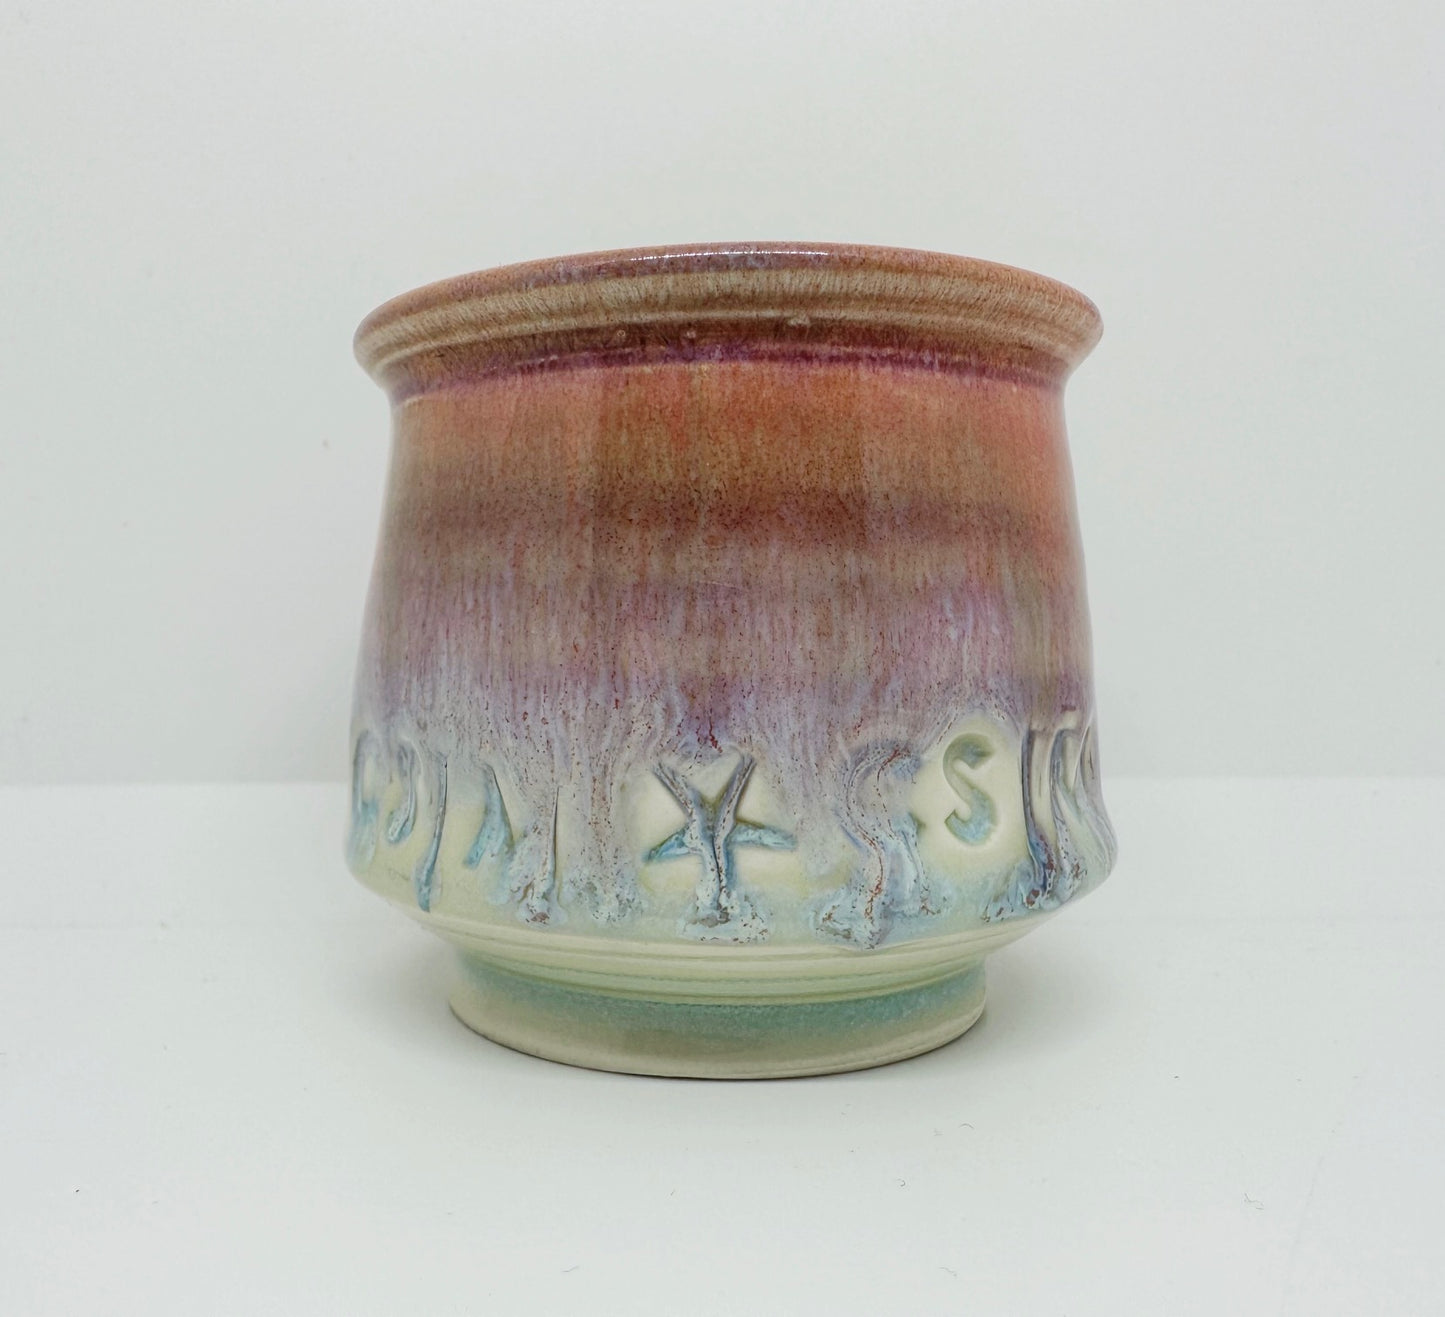 Handmade ‘Small Planter 5’ with CSM logo and colorful drippy glaze 